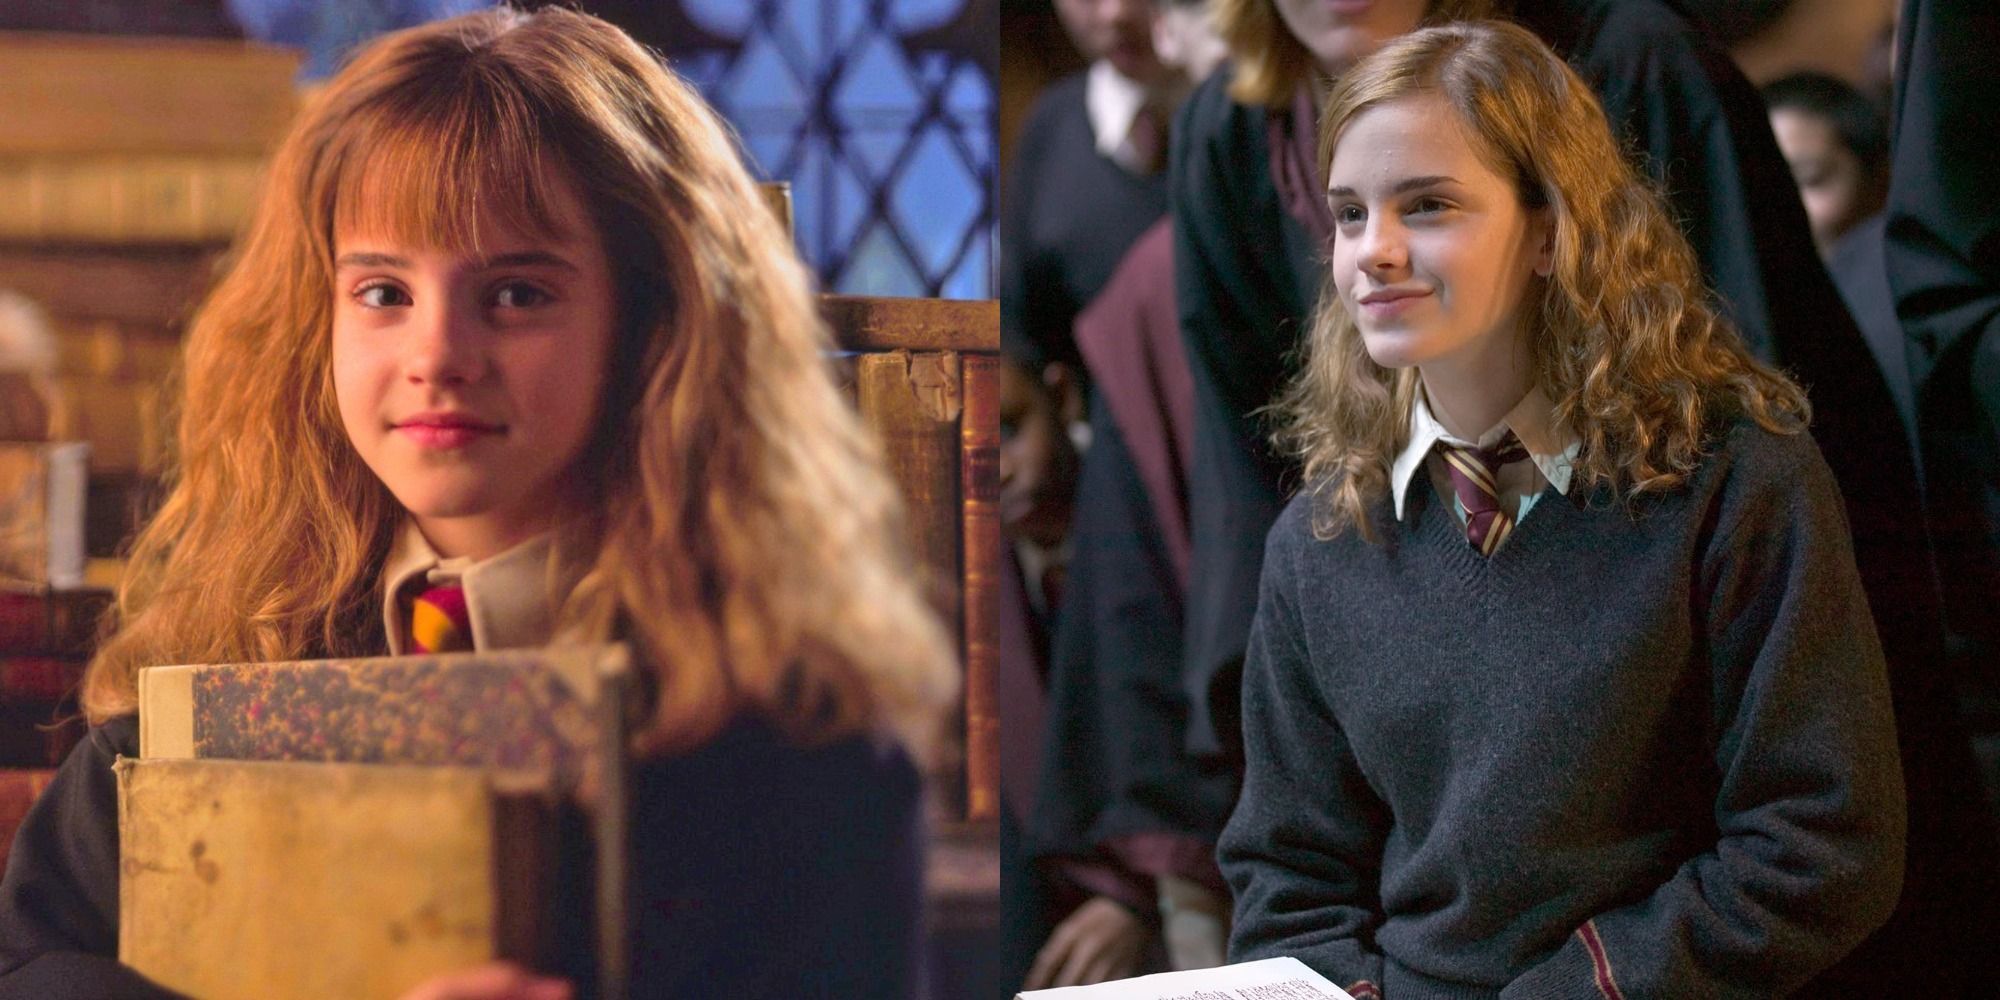 Split image showing Hermione in Sorcerer's Stone and Goblet of Fire